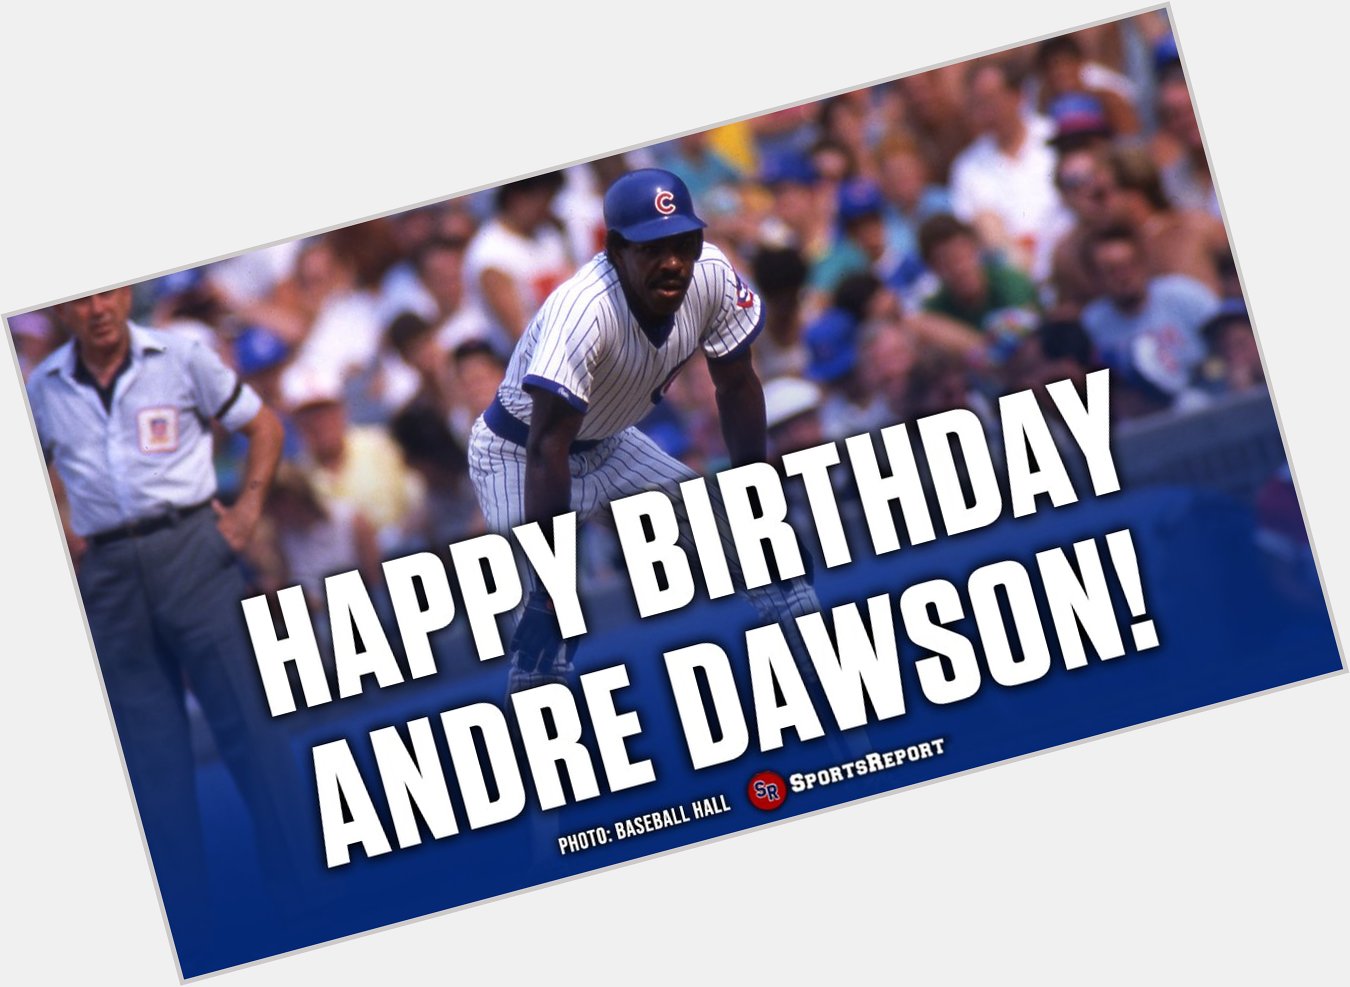  Fans, let\s wish legend Andre Dawson a Happy Birthday! GO CUBS!! 